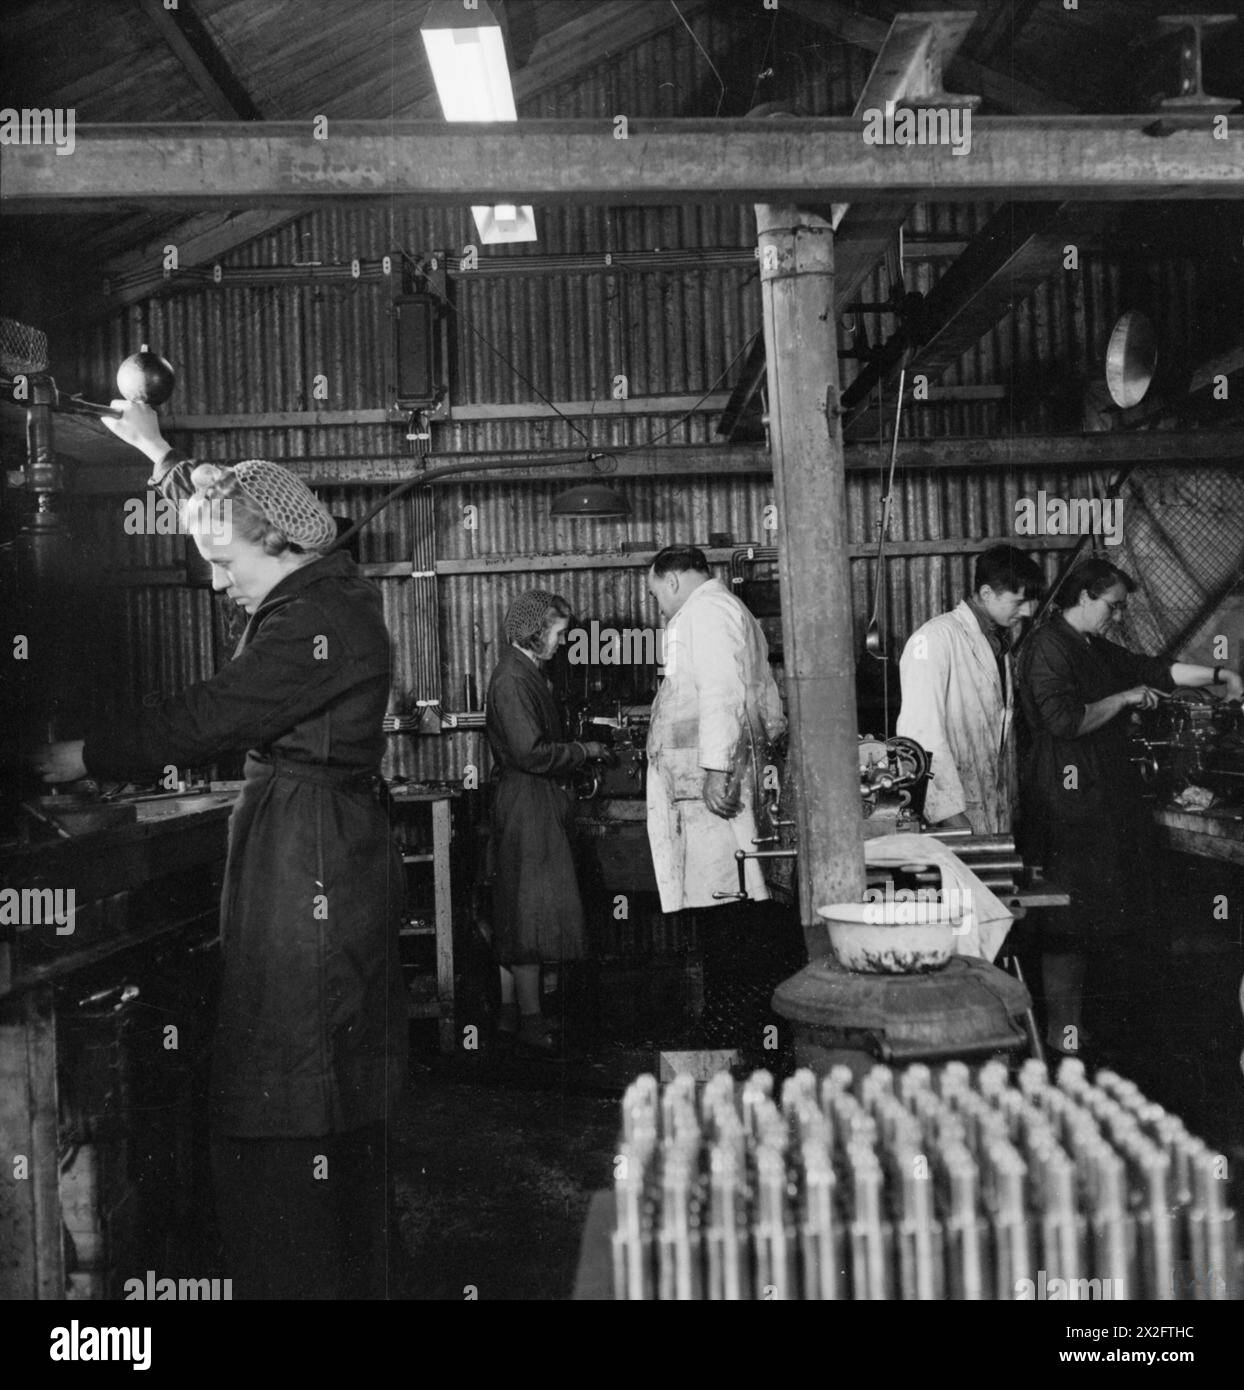 STEN GUN PRODUCTION IN BRITAIN, 1943 - Mrs Lushby (left) and colleagues at work in a small 'factory' producing breech blocks from steel bars. This 'factory', previously used as a hen house, was owned by Mr C W (Charles) Packard, an engineer and former haulage contractor, and was probably in Welwyn Garden City. In the foreground, rows of finished 'block pieces' can be seen, ready for the next stage of production Stock Photo